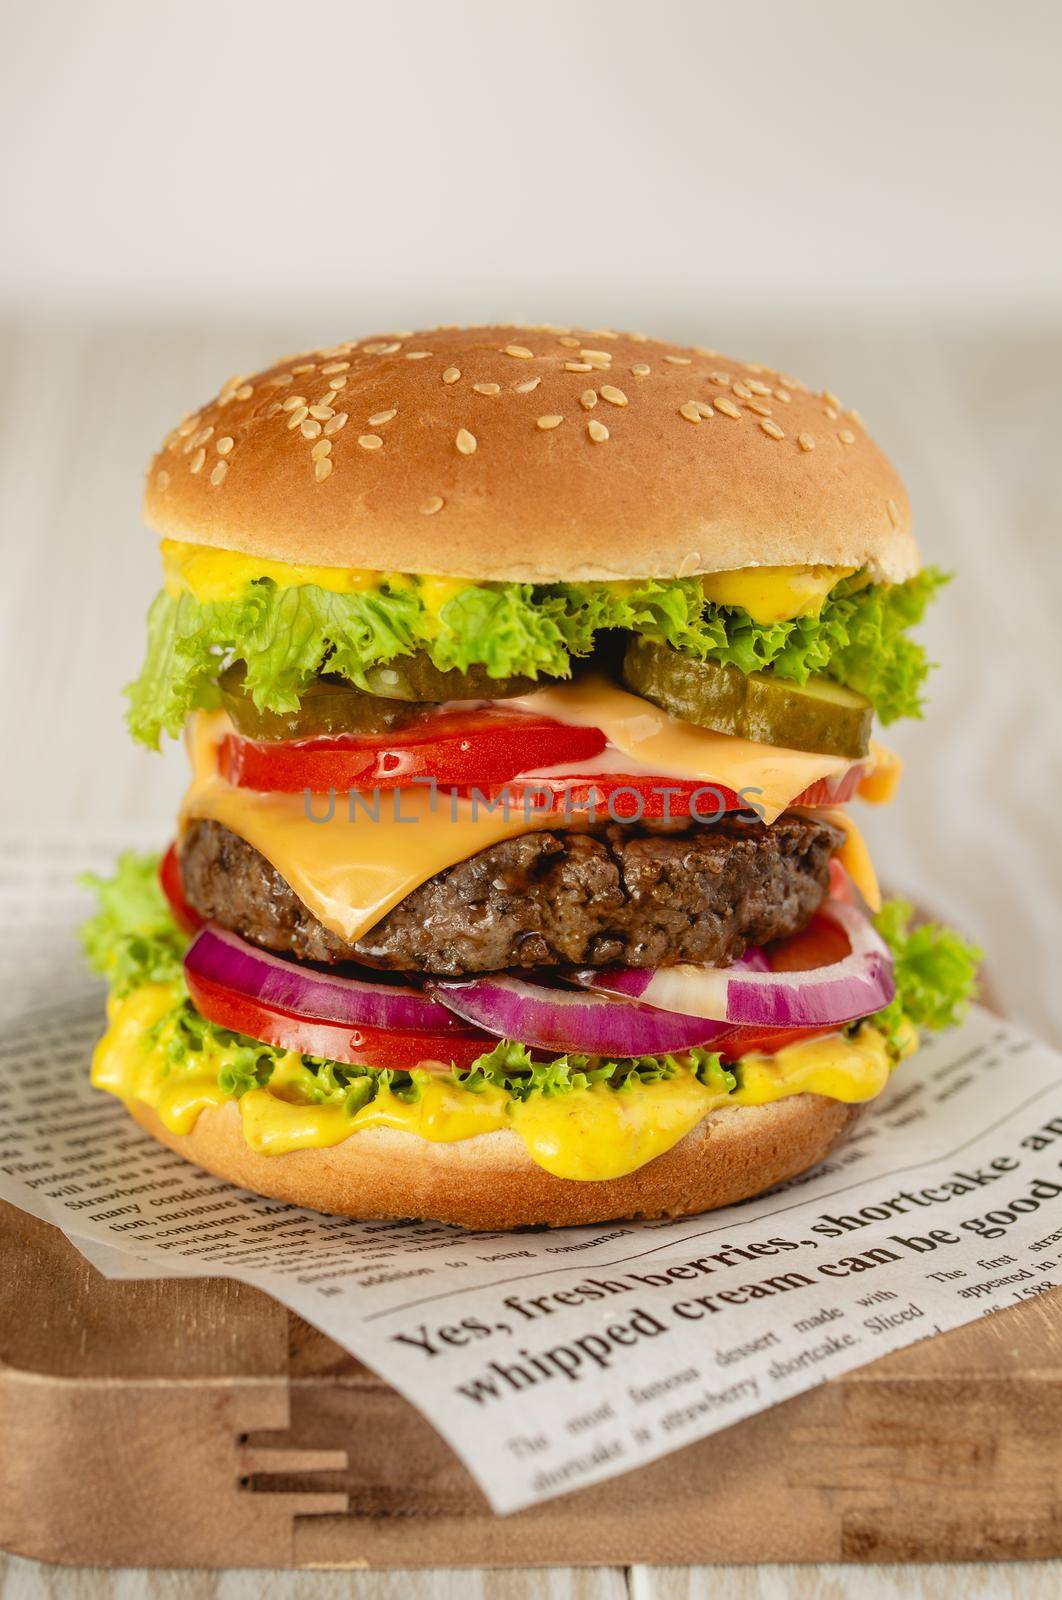 Delicious burger with meat, melted cheese, dripping sauce and vegetables on white rustic background. Freshly made tasty hamburger, close-up.